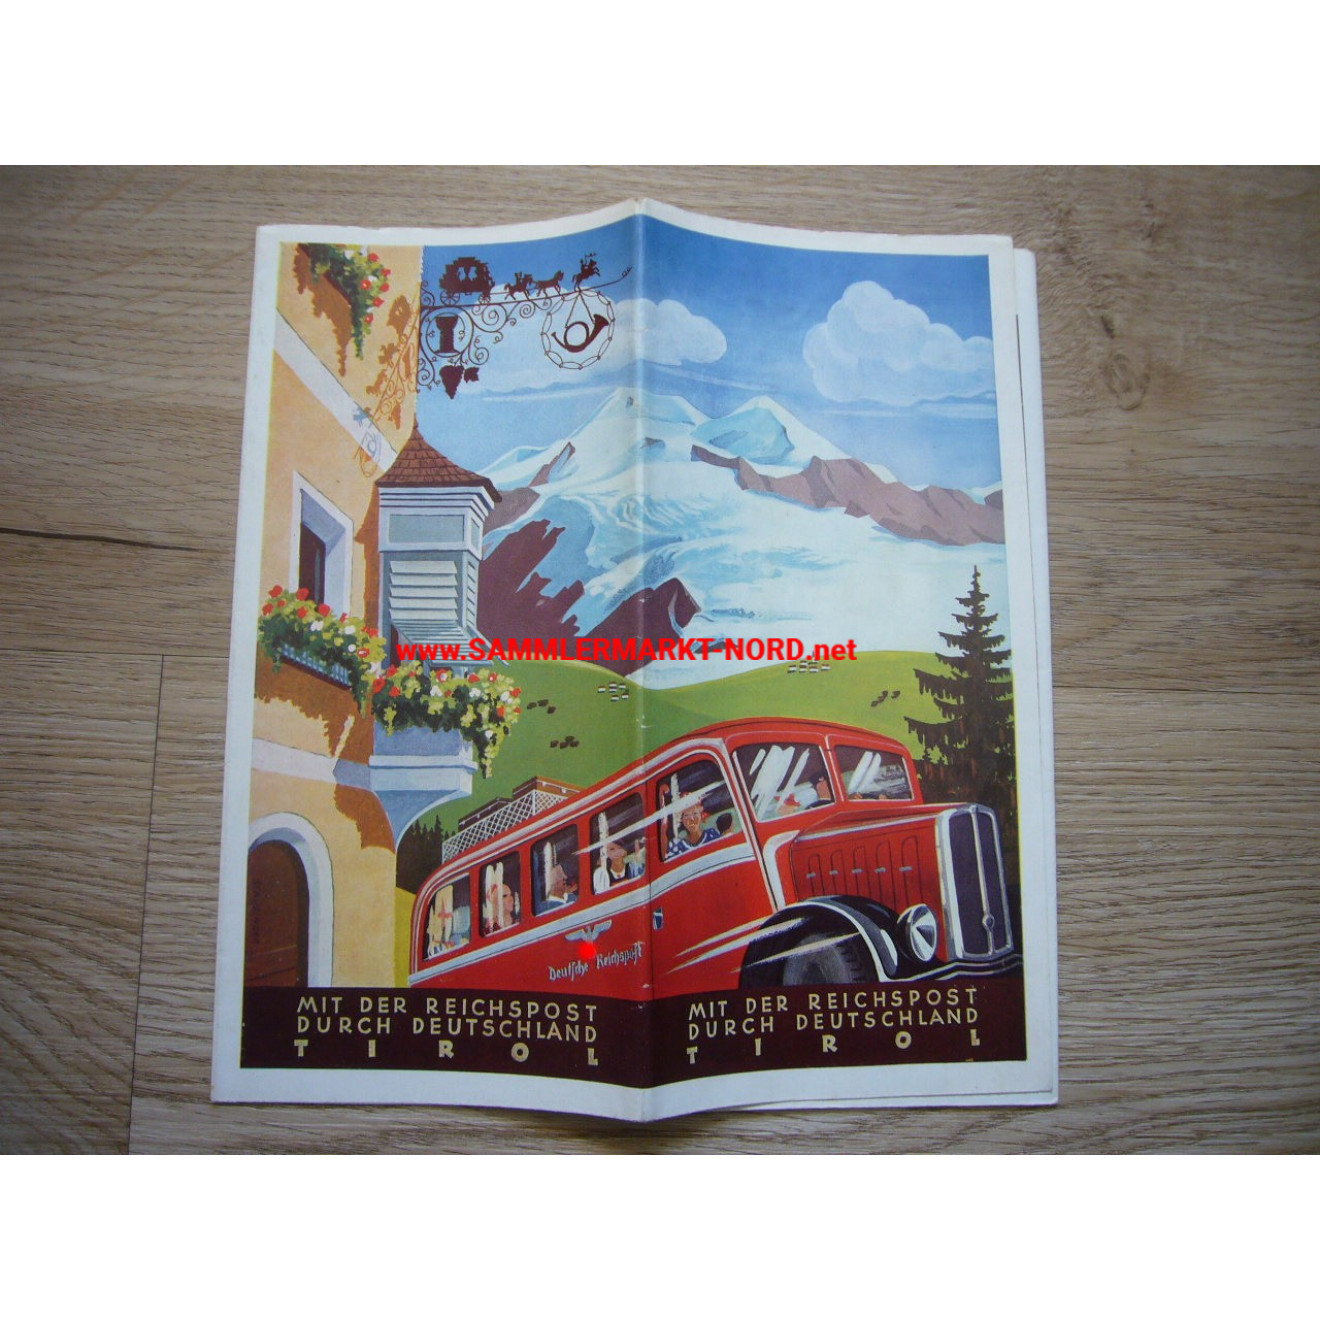 With the Reichspost through Germany & Tyrol - Brochure / Map ca. 1937